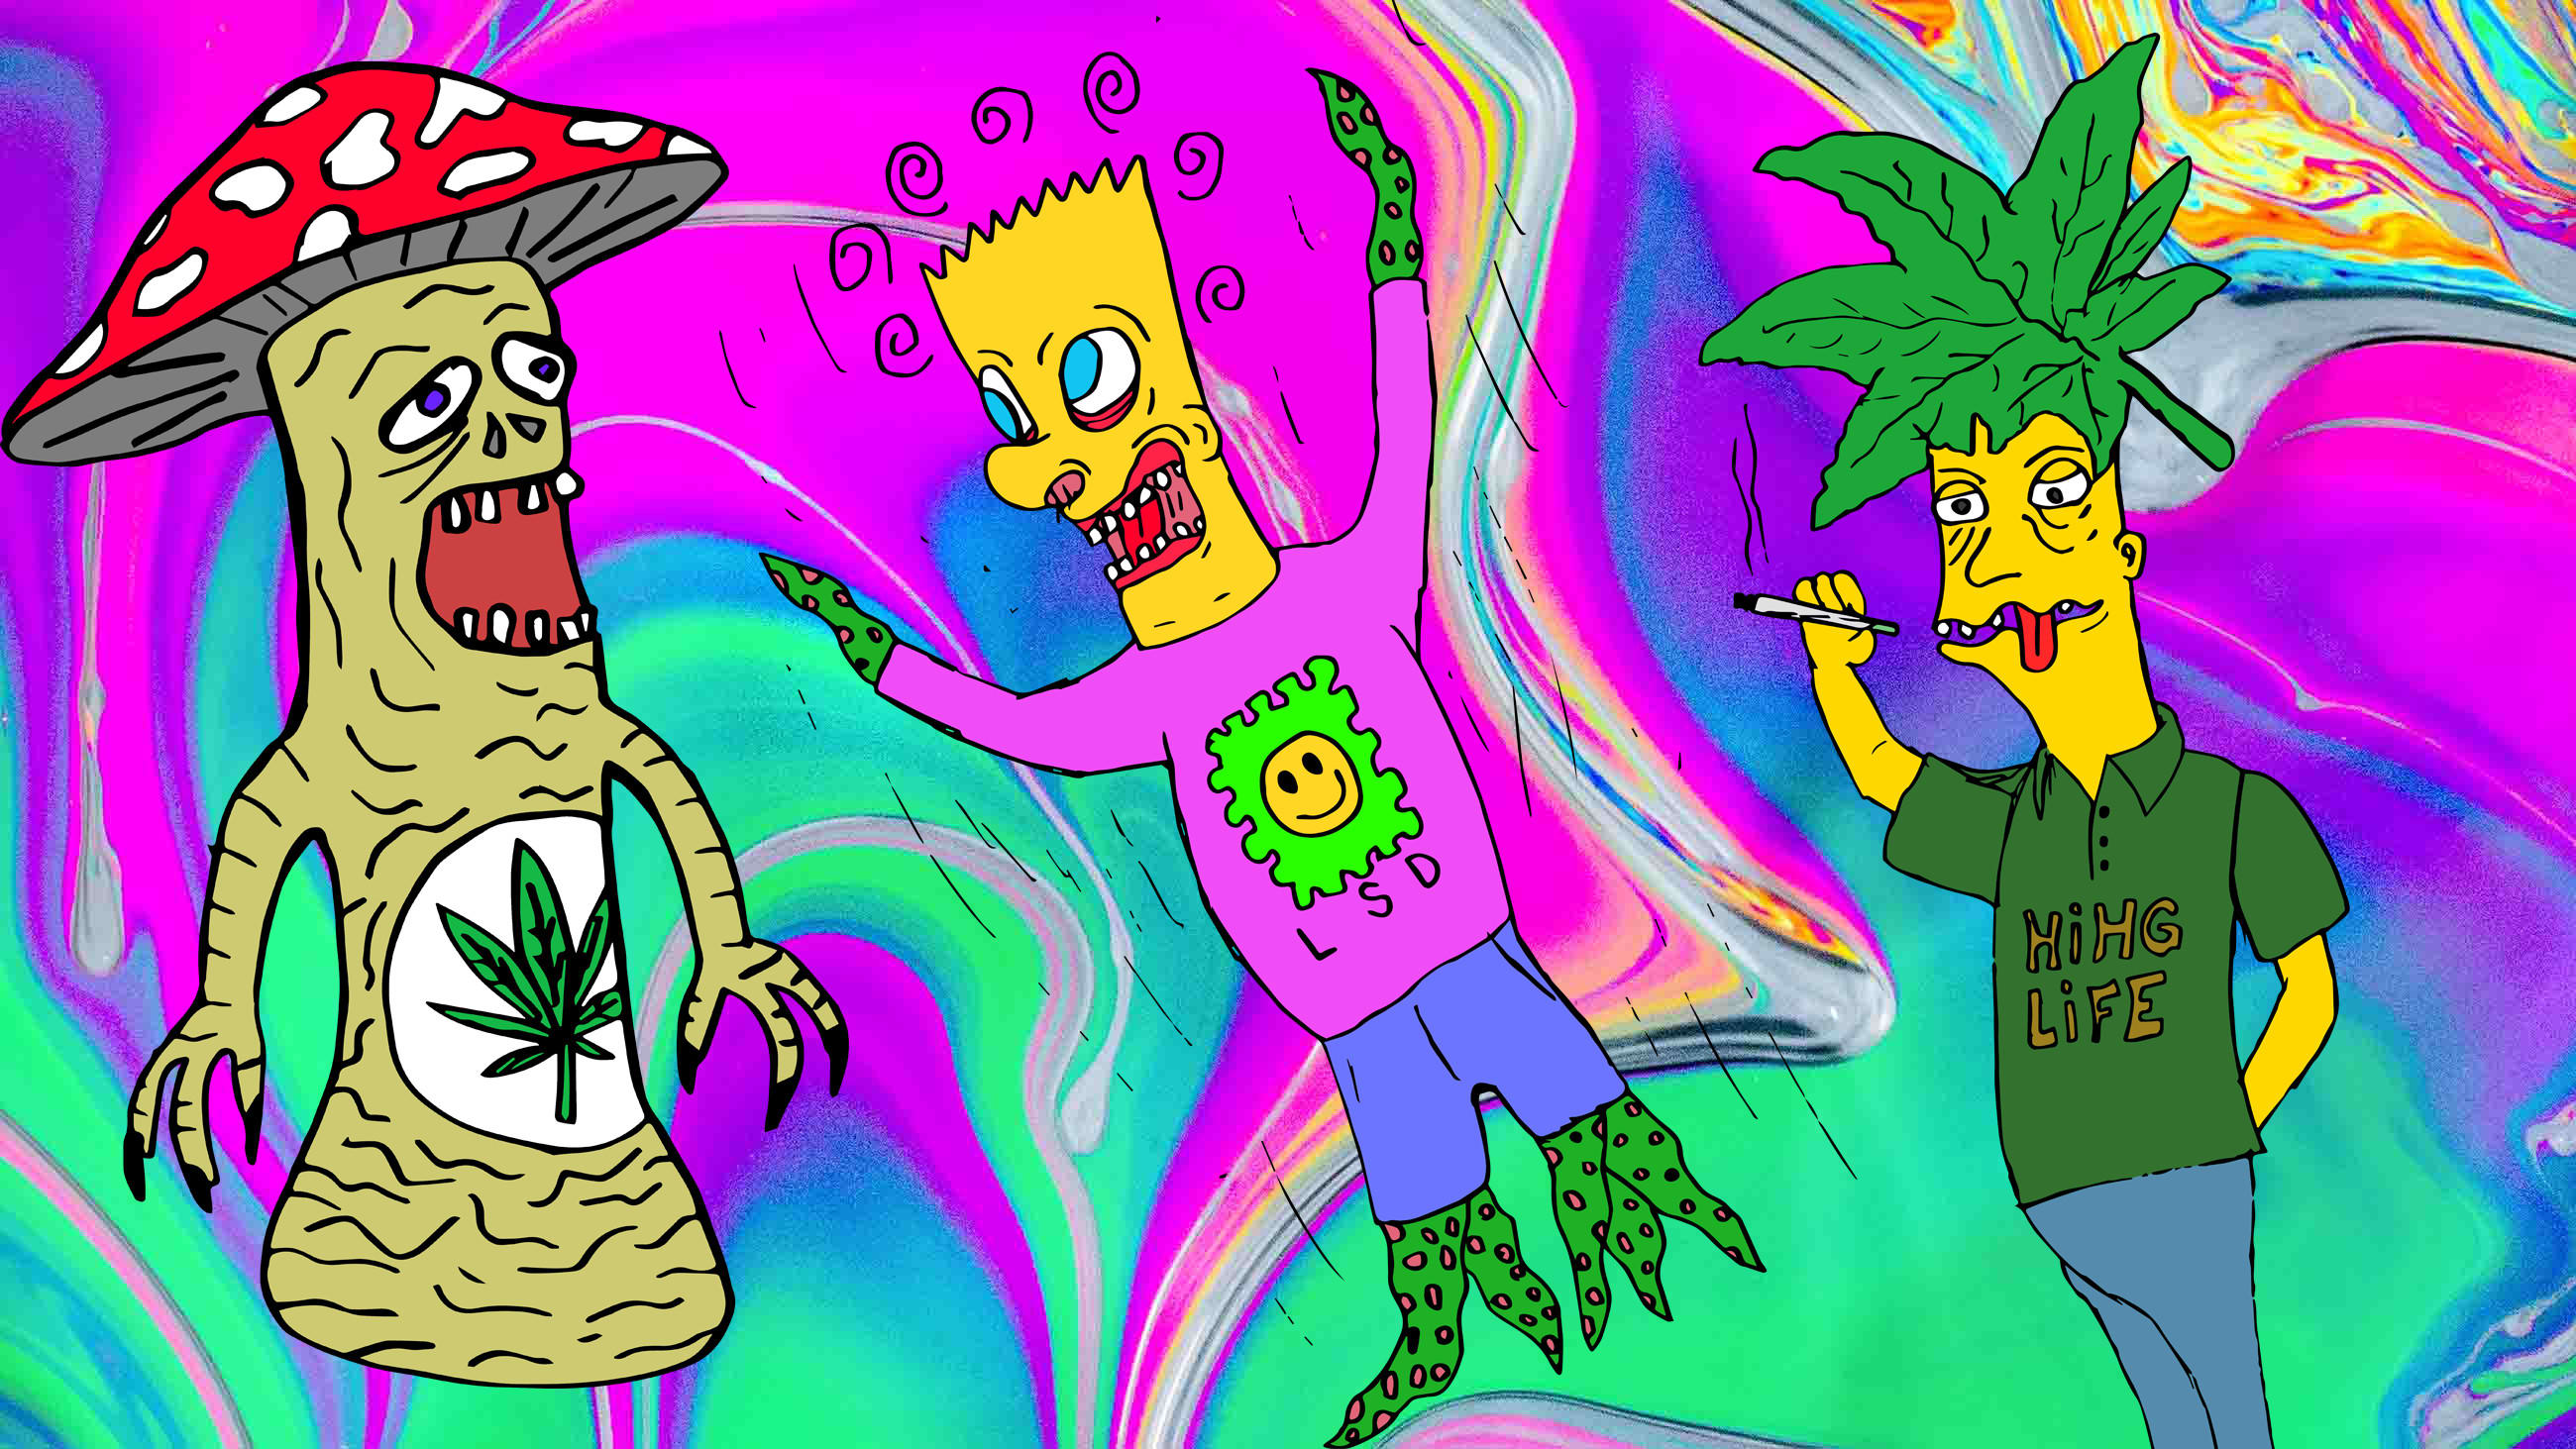 Draw A Trippy Weed Cartoon Character Or Logo By Crazycartoon Check out insp...